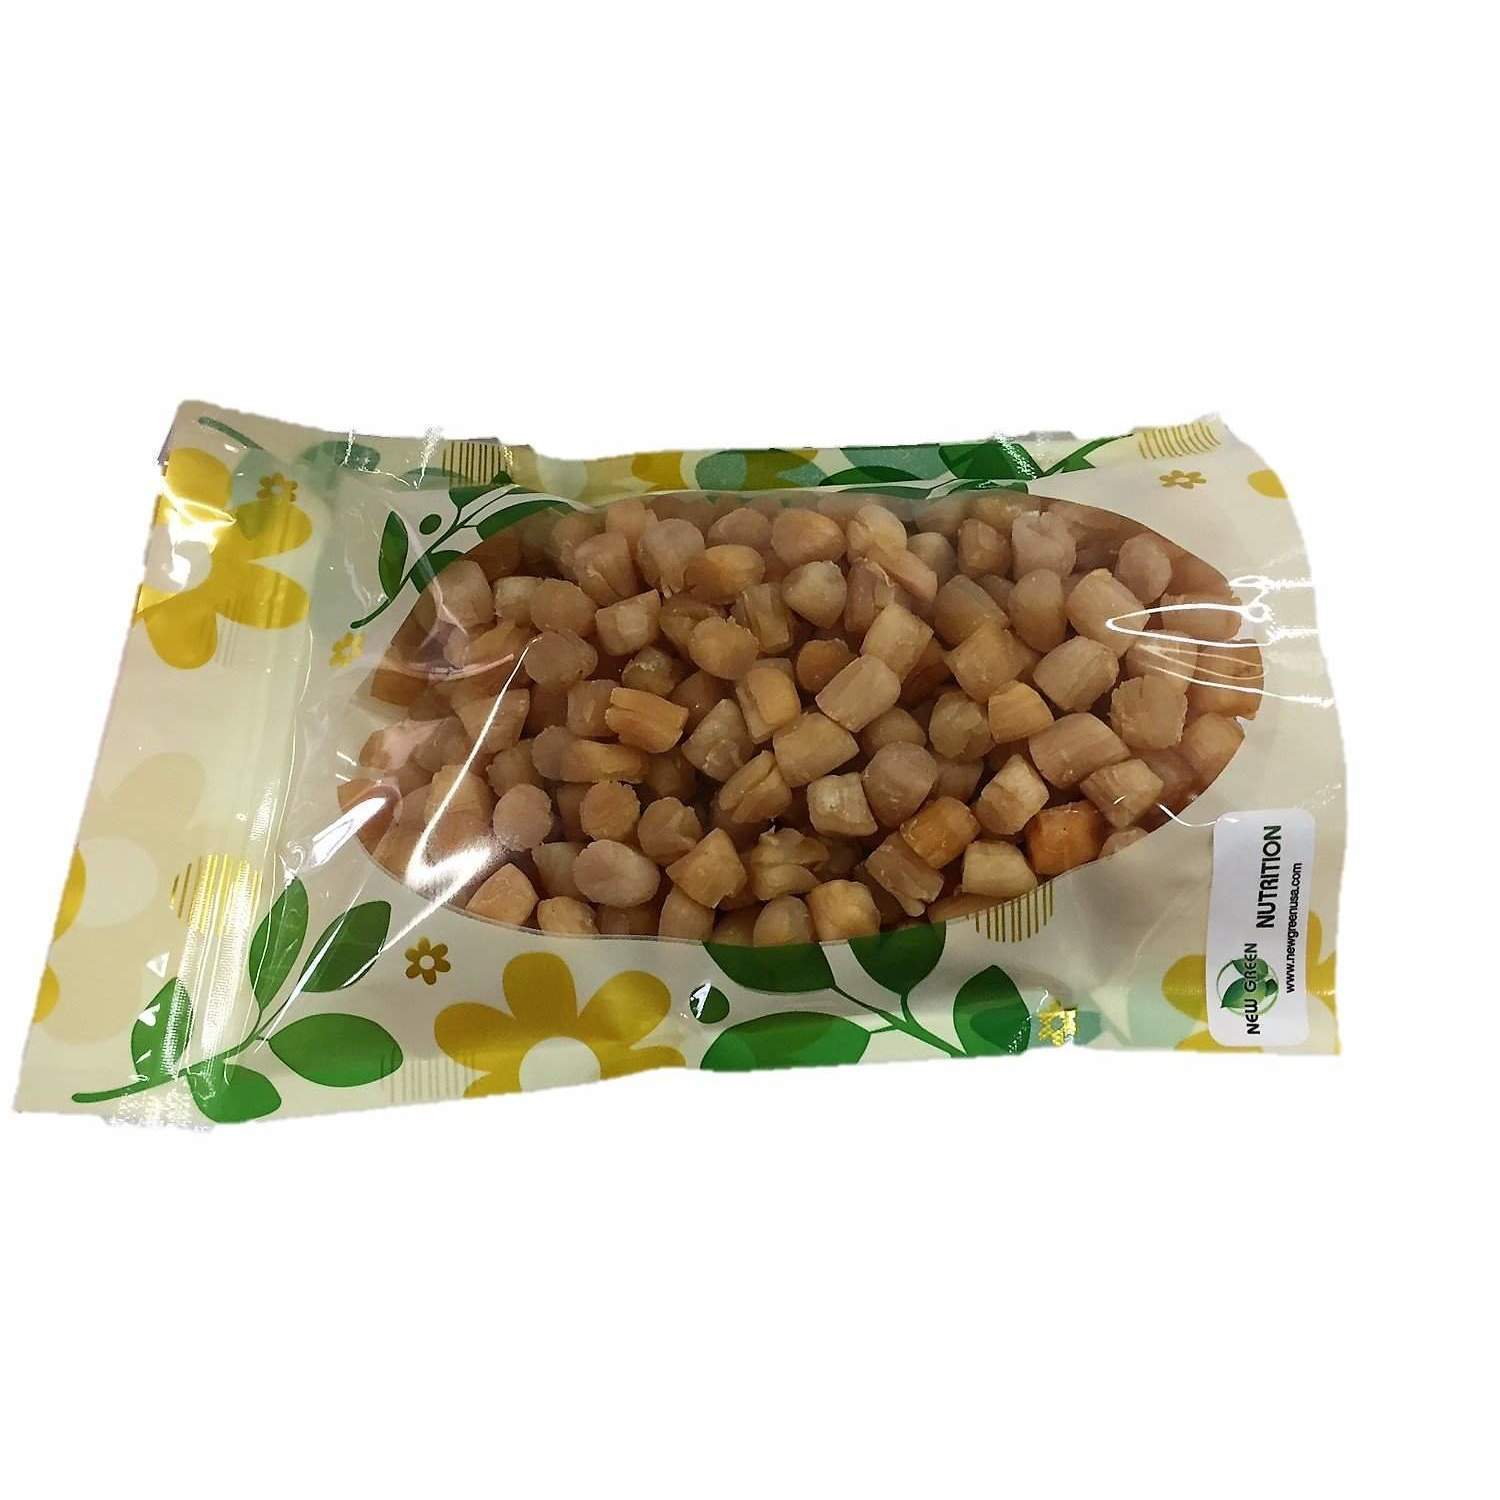 Dried Qingdao Small Scallops (1LB.) - Buy at New Green Nutrition